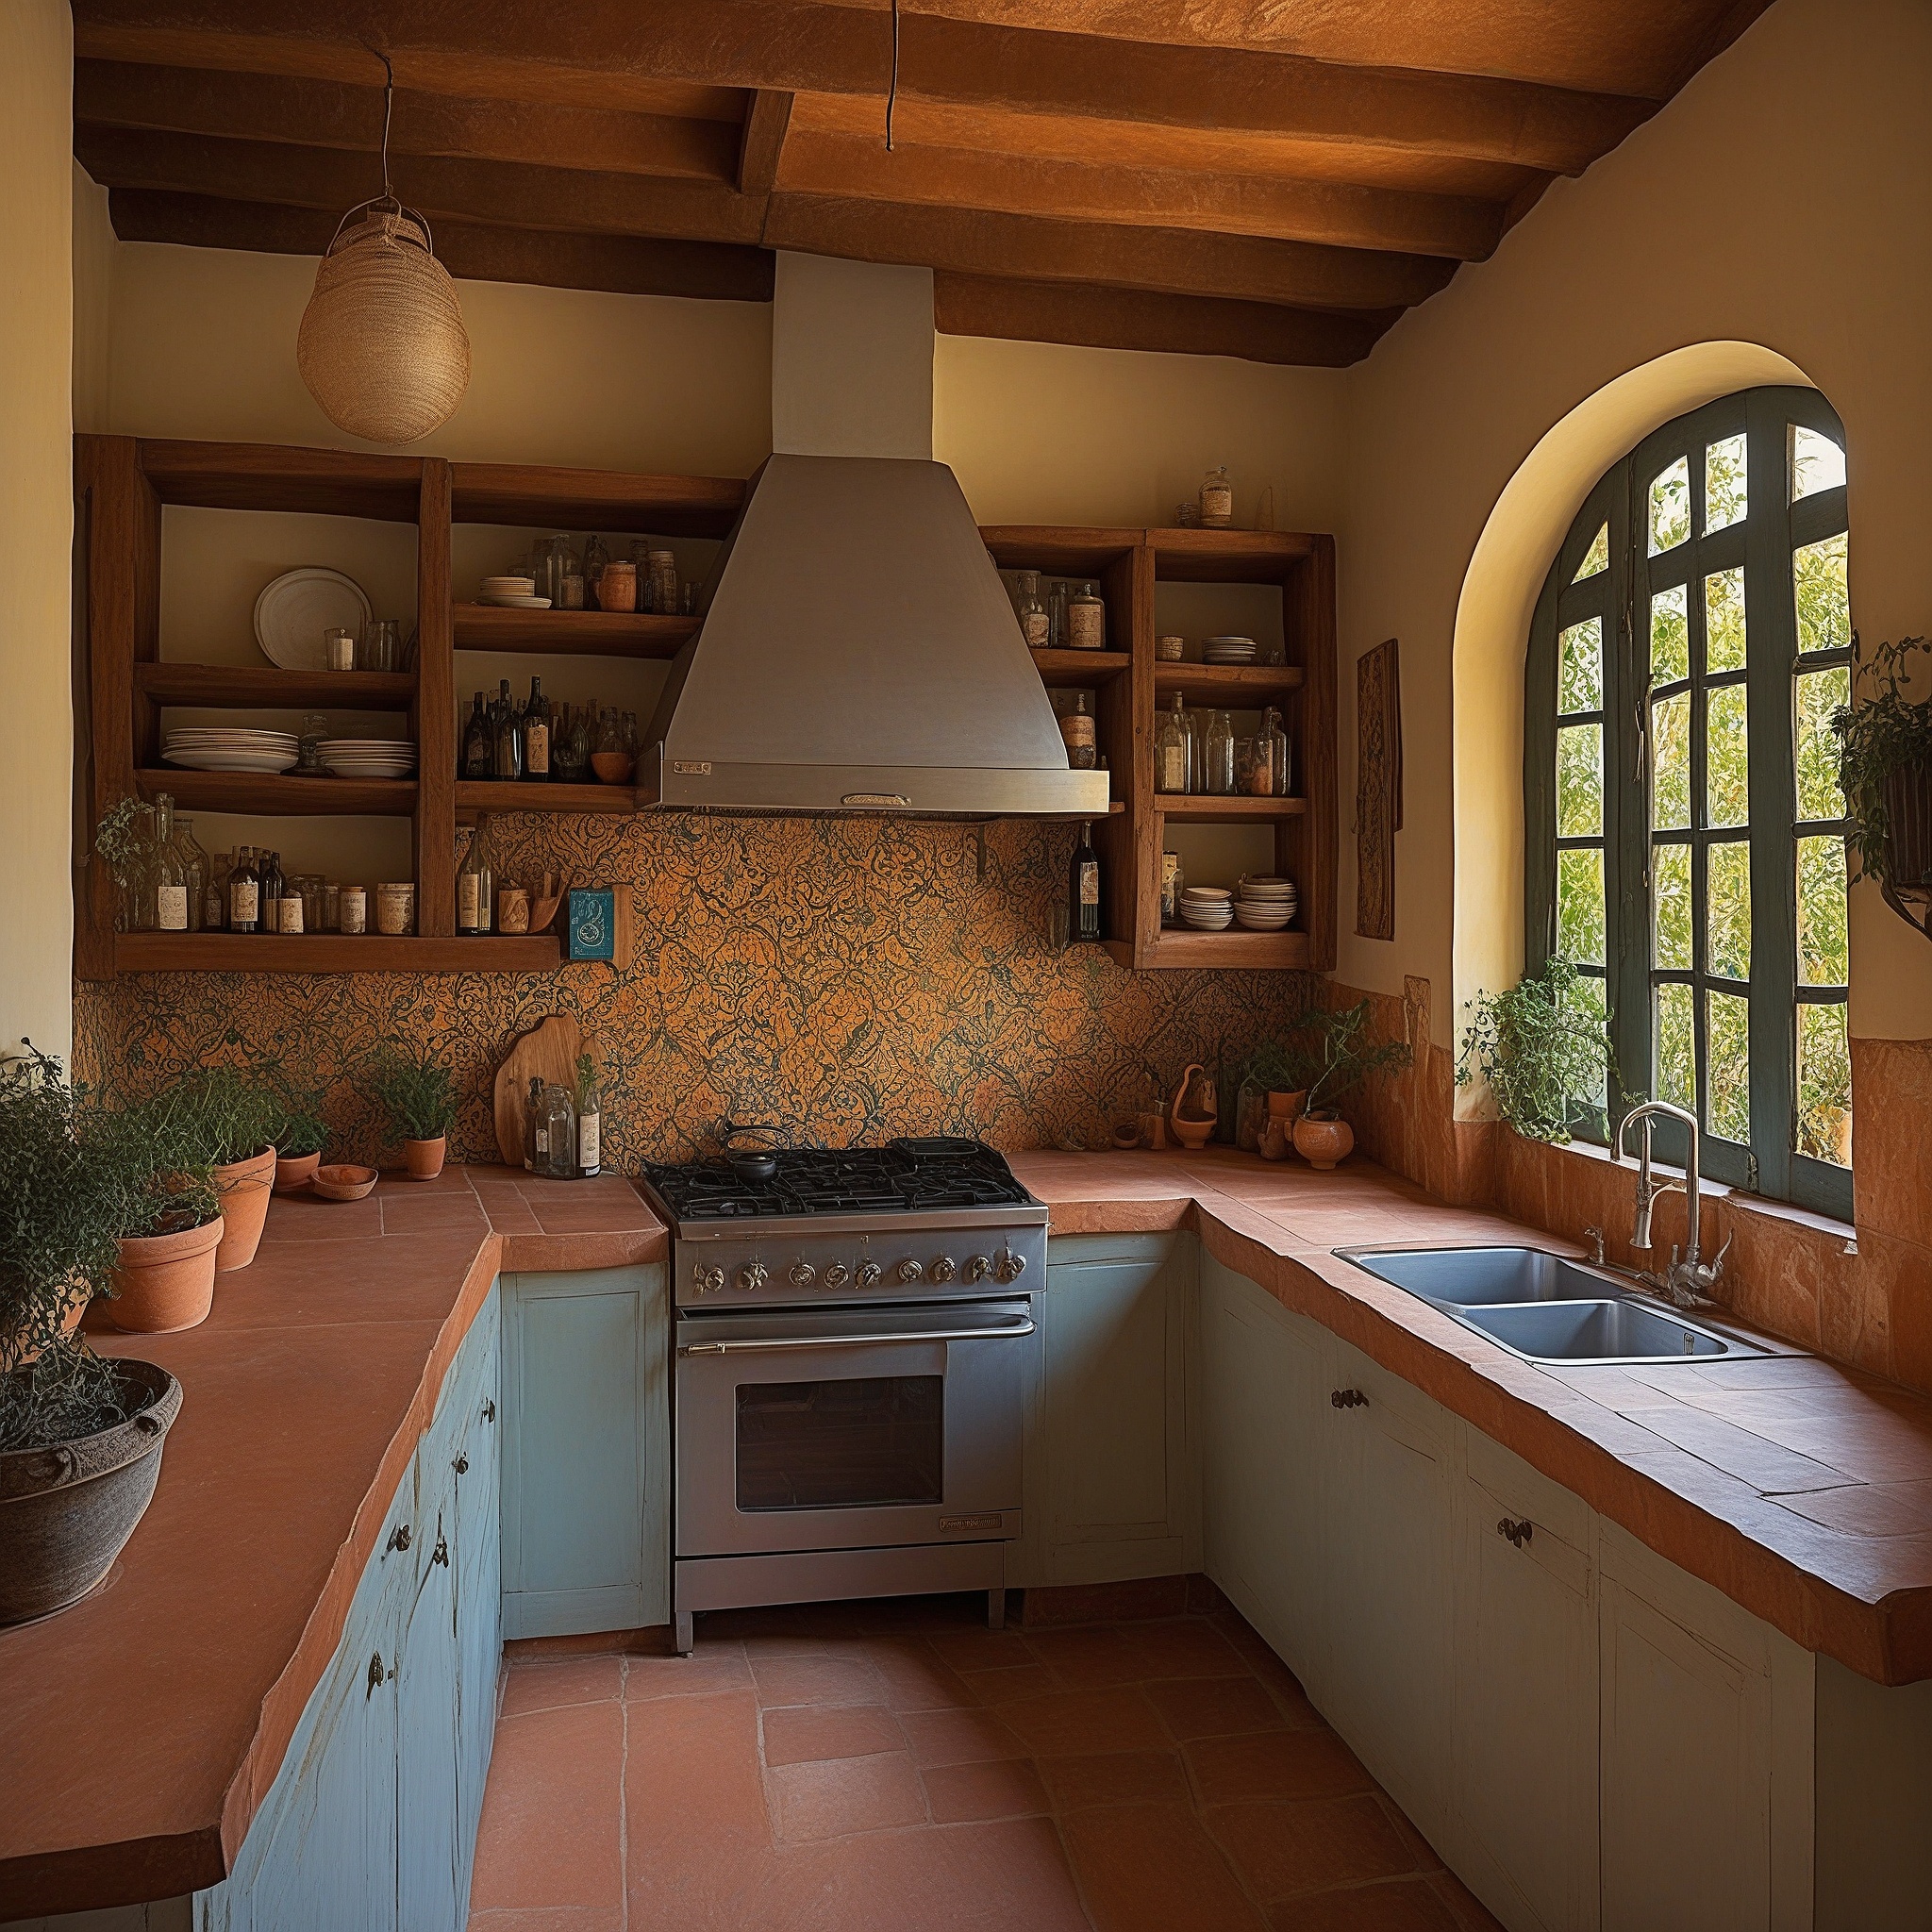 Small Mediterranean Kitchen Layout with Colorful Tile Backsplash, Open Shelving, and Terracotta Floor Tiles